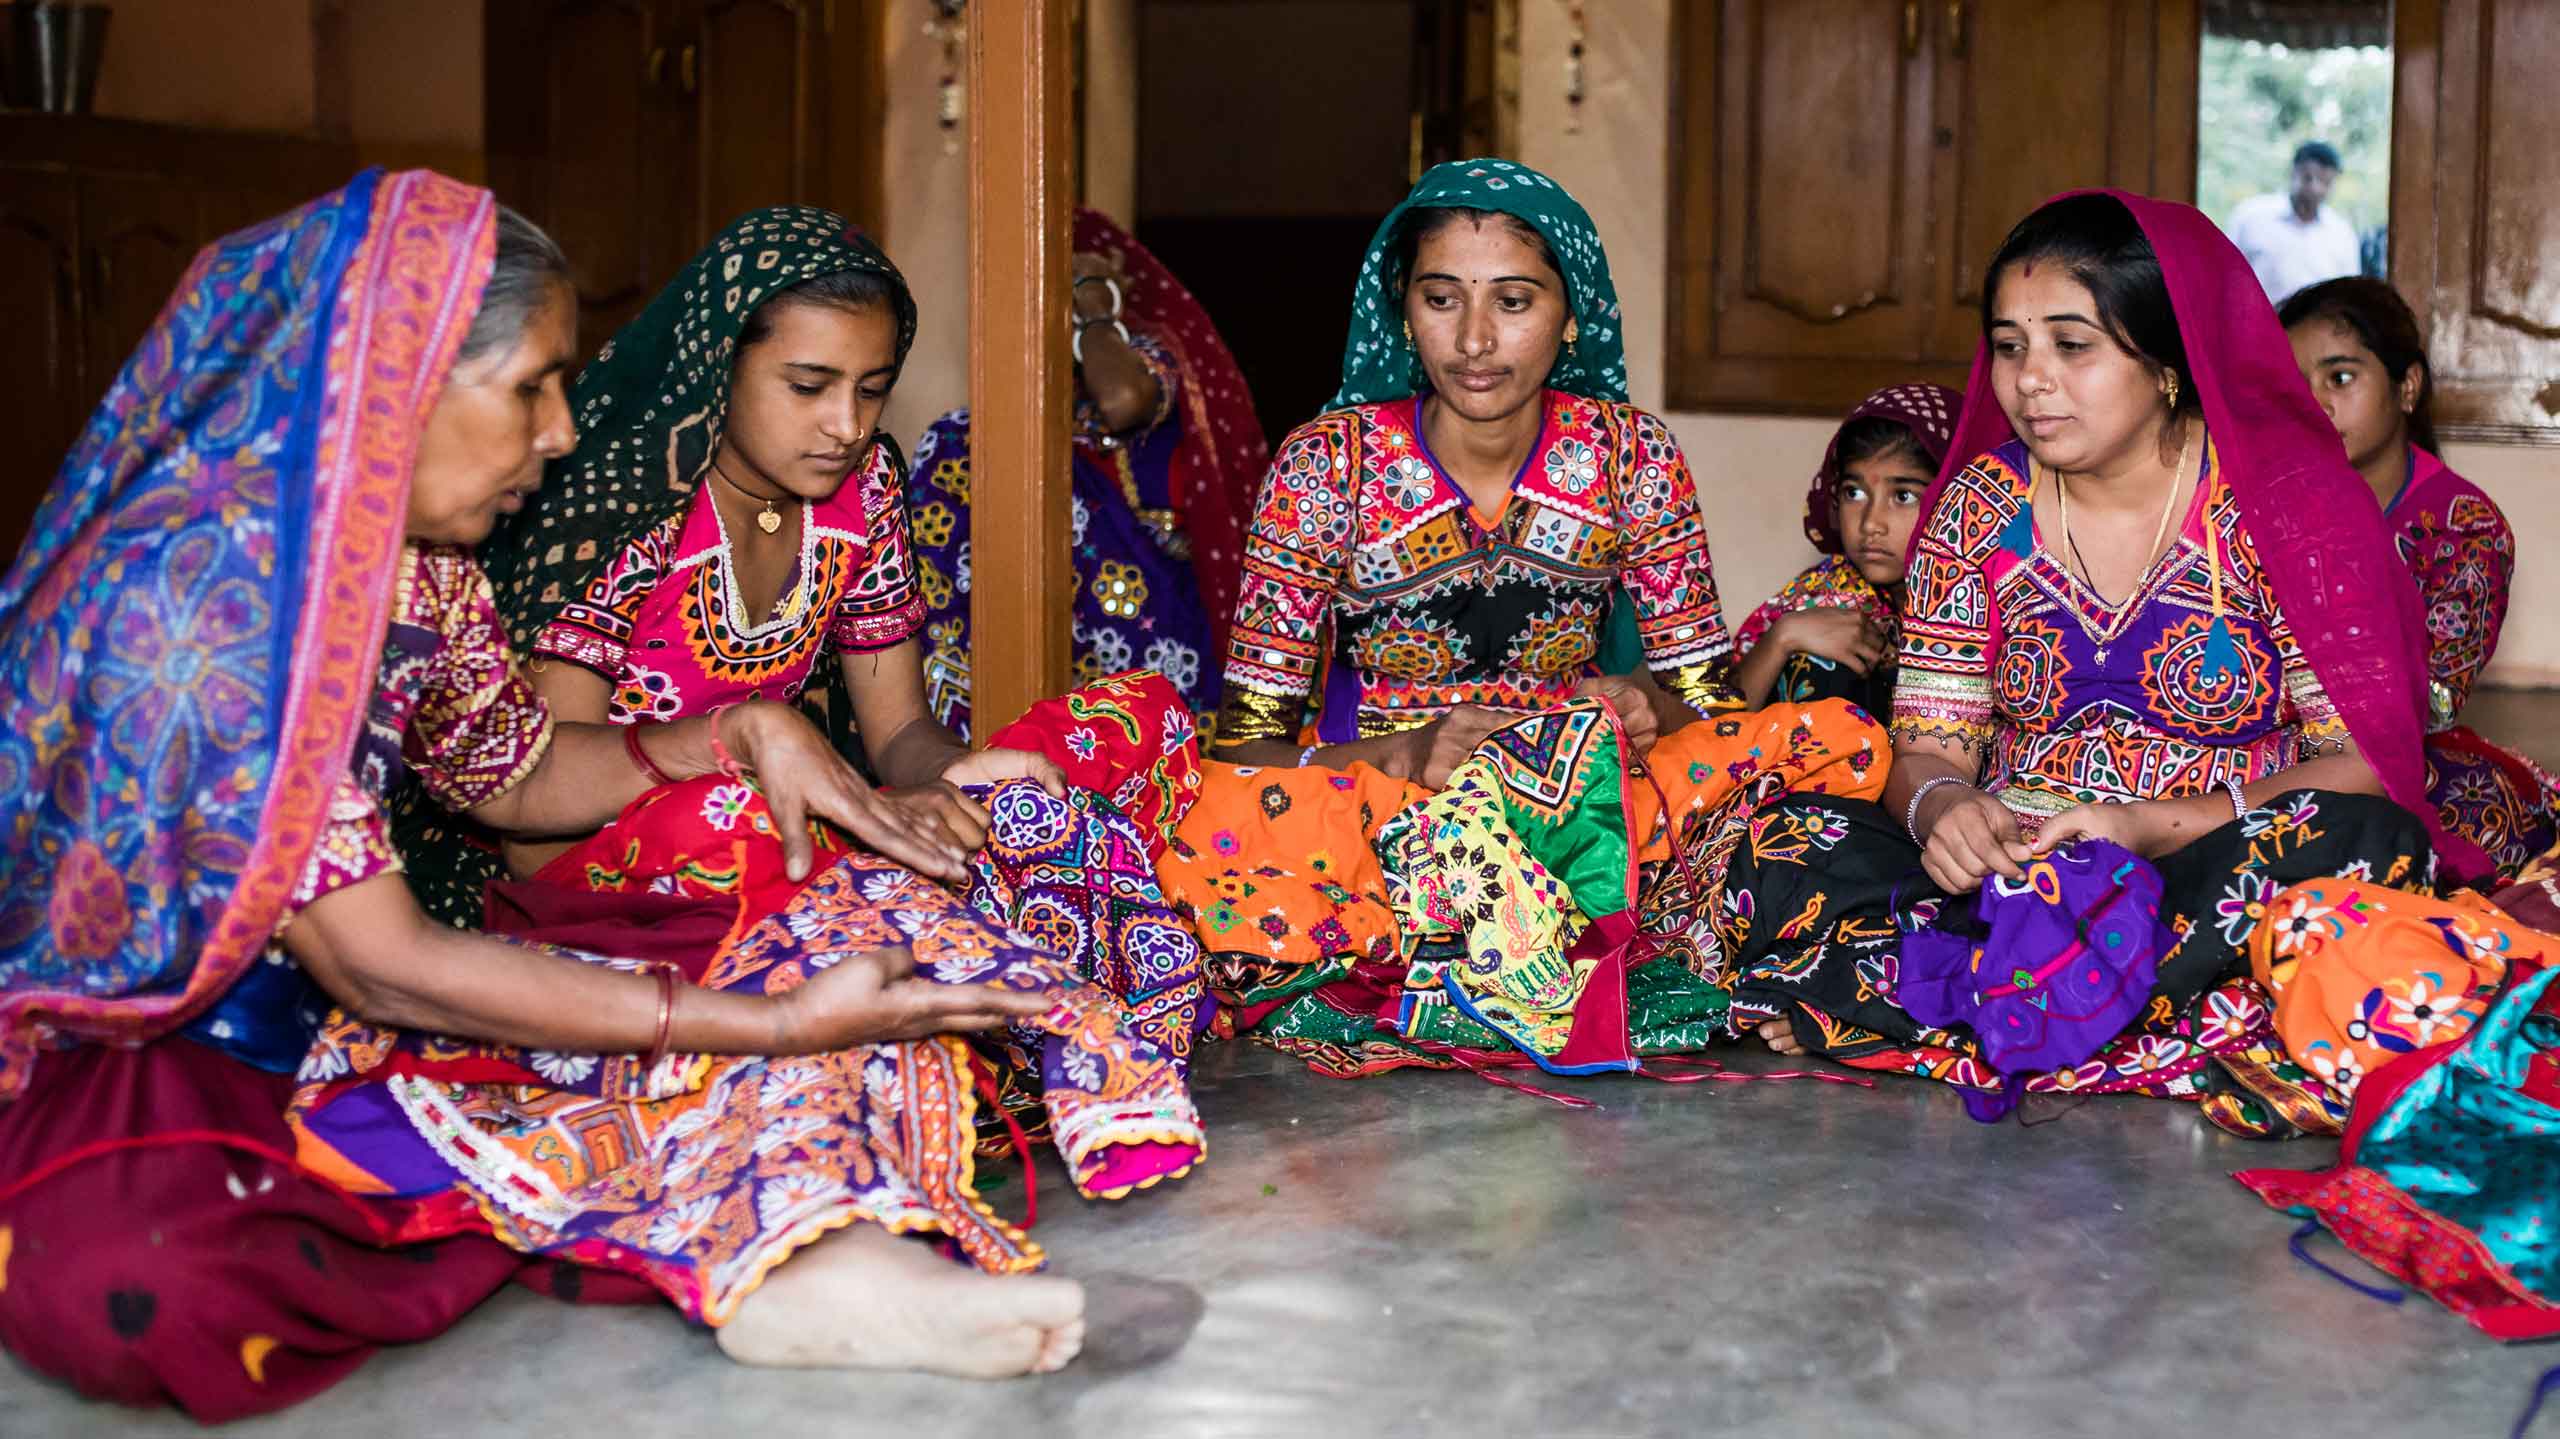 Women working on hand embroidery in India